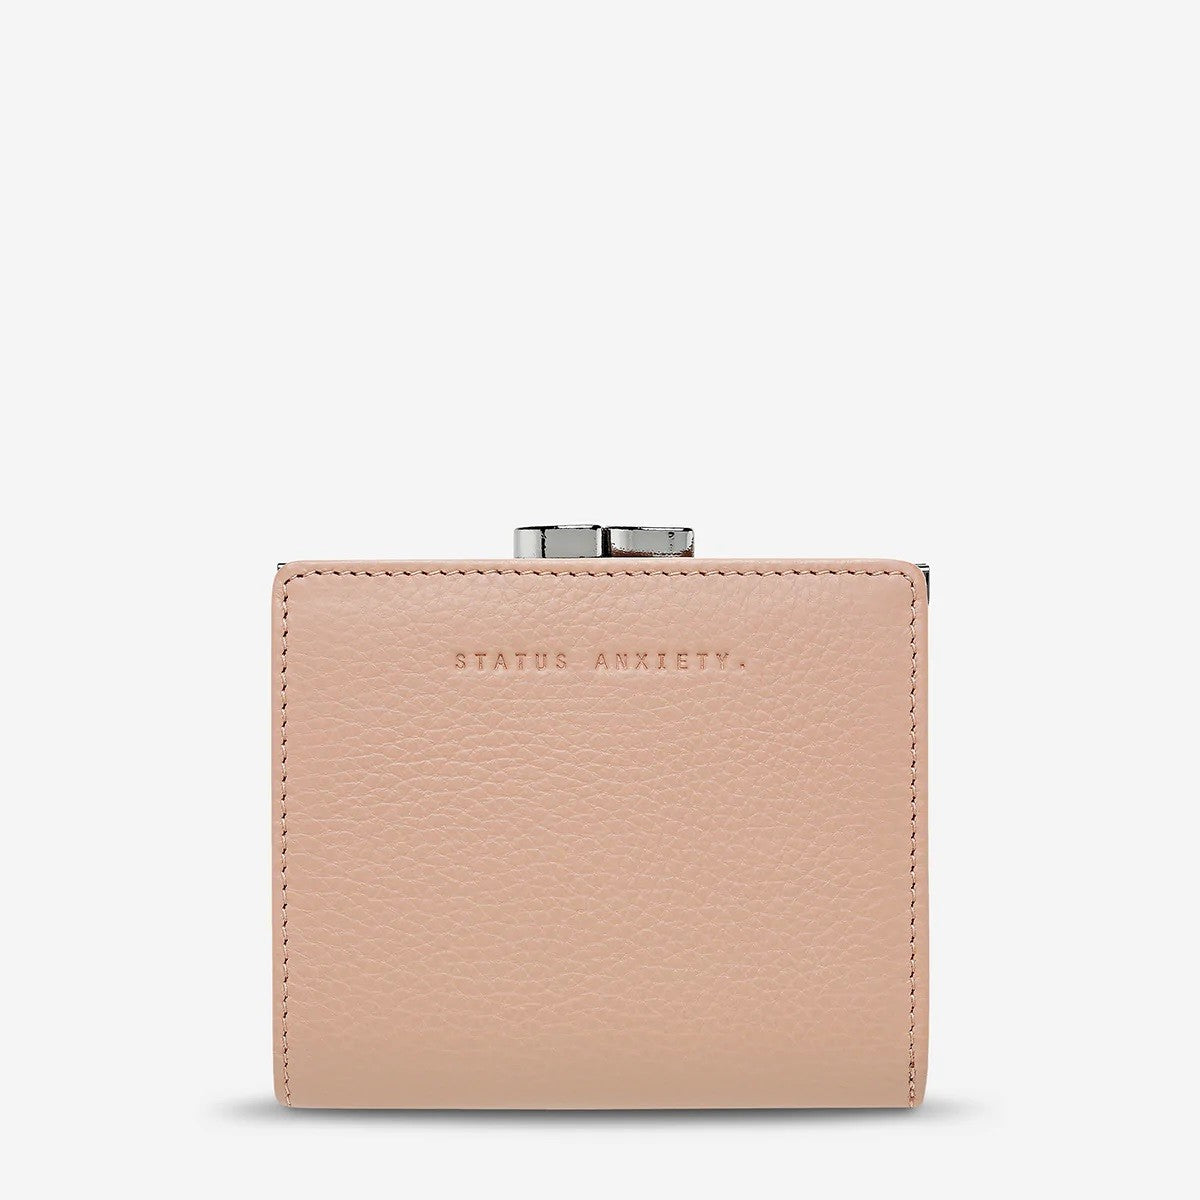 Status Anxiety As You Were Purse [COLOUR:Dusty pink]